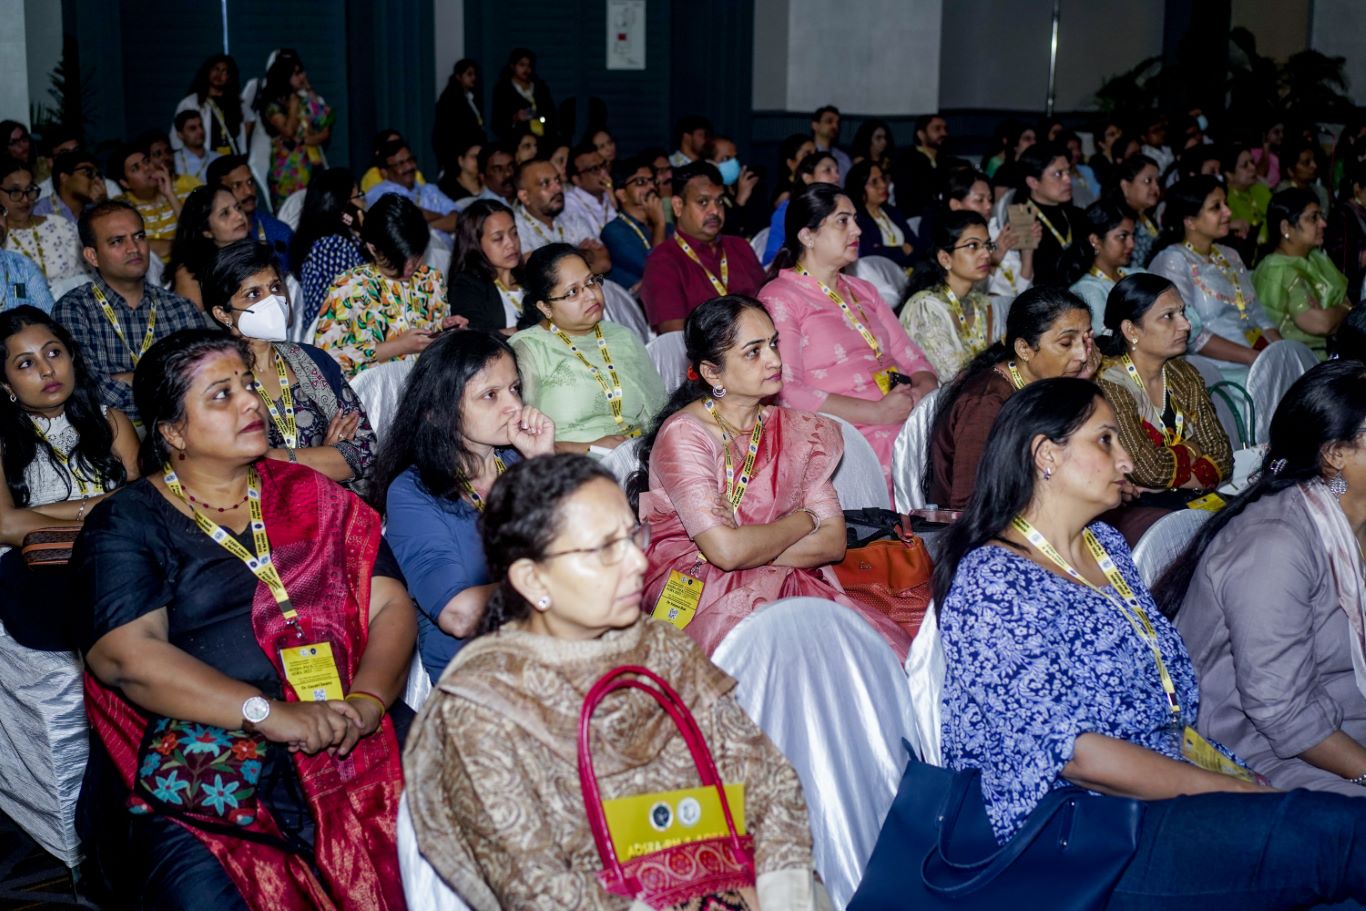 AORA INDIA - MORNING SESSION HALL A